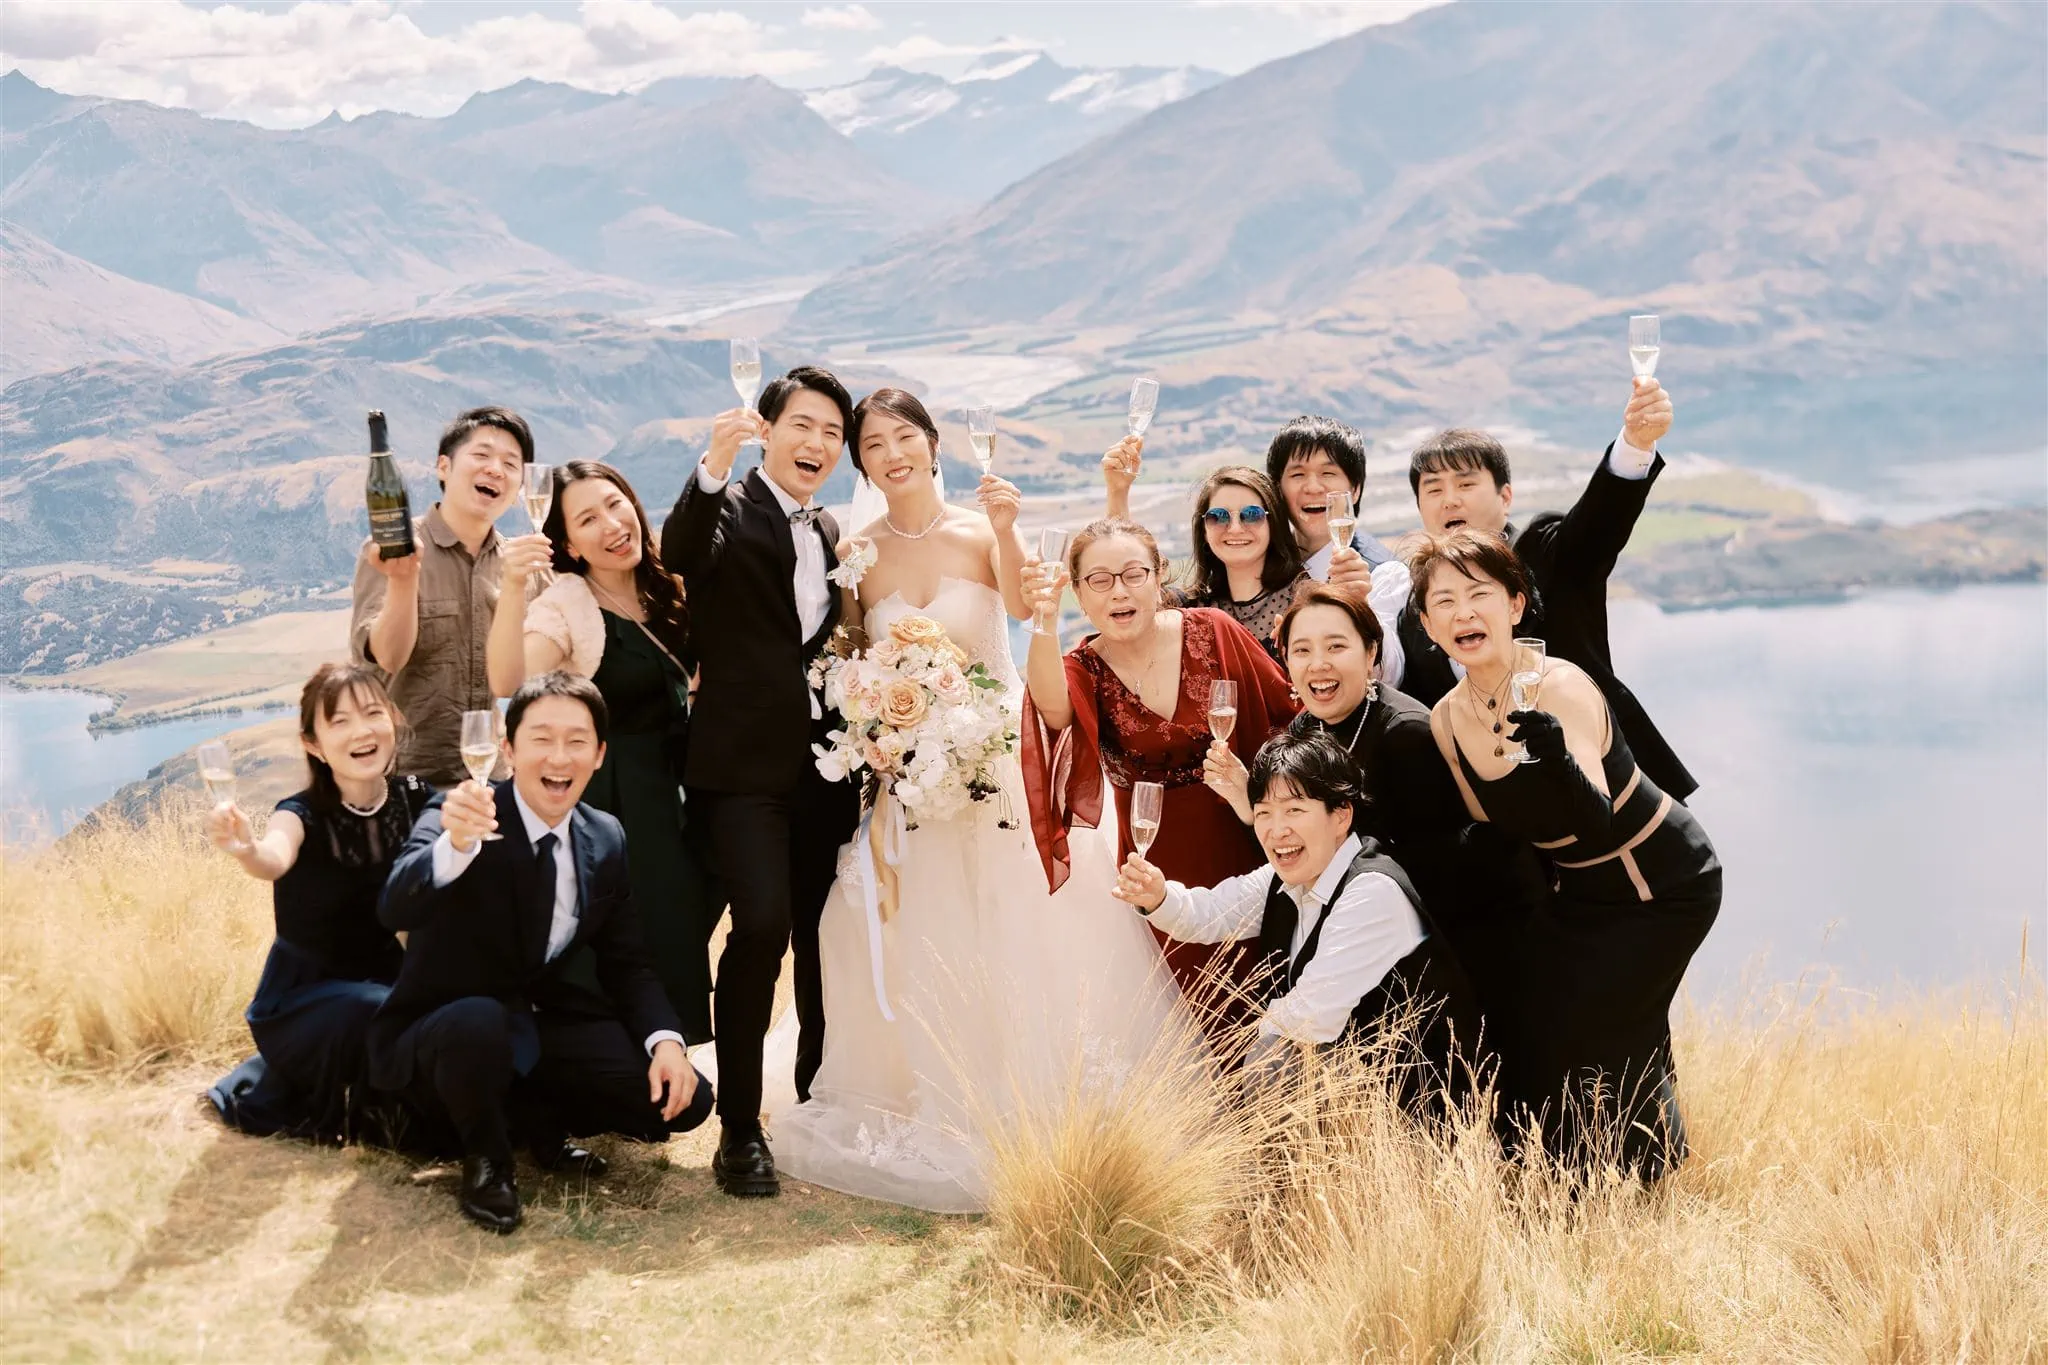 Kyoto Tokyo Japan Elopement Wedding Photographer, Planner & Videographer | A wedding group photo with attendees pointing to the sky, set against a backdrop of mountains and a lake, captured by Japan Wedding Photographer Yuri.